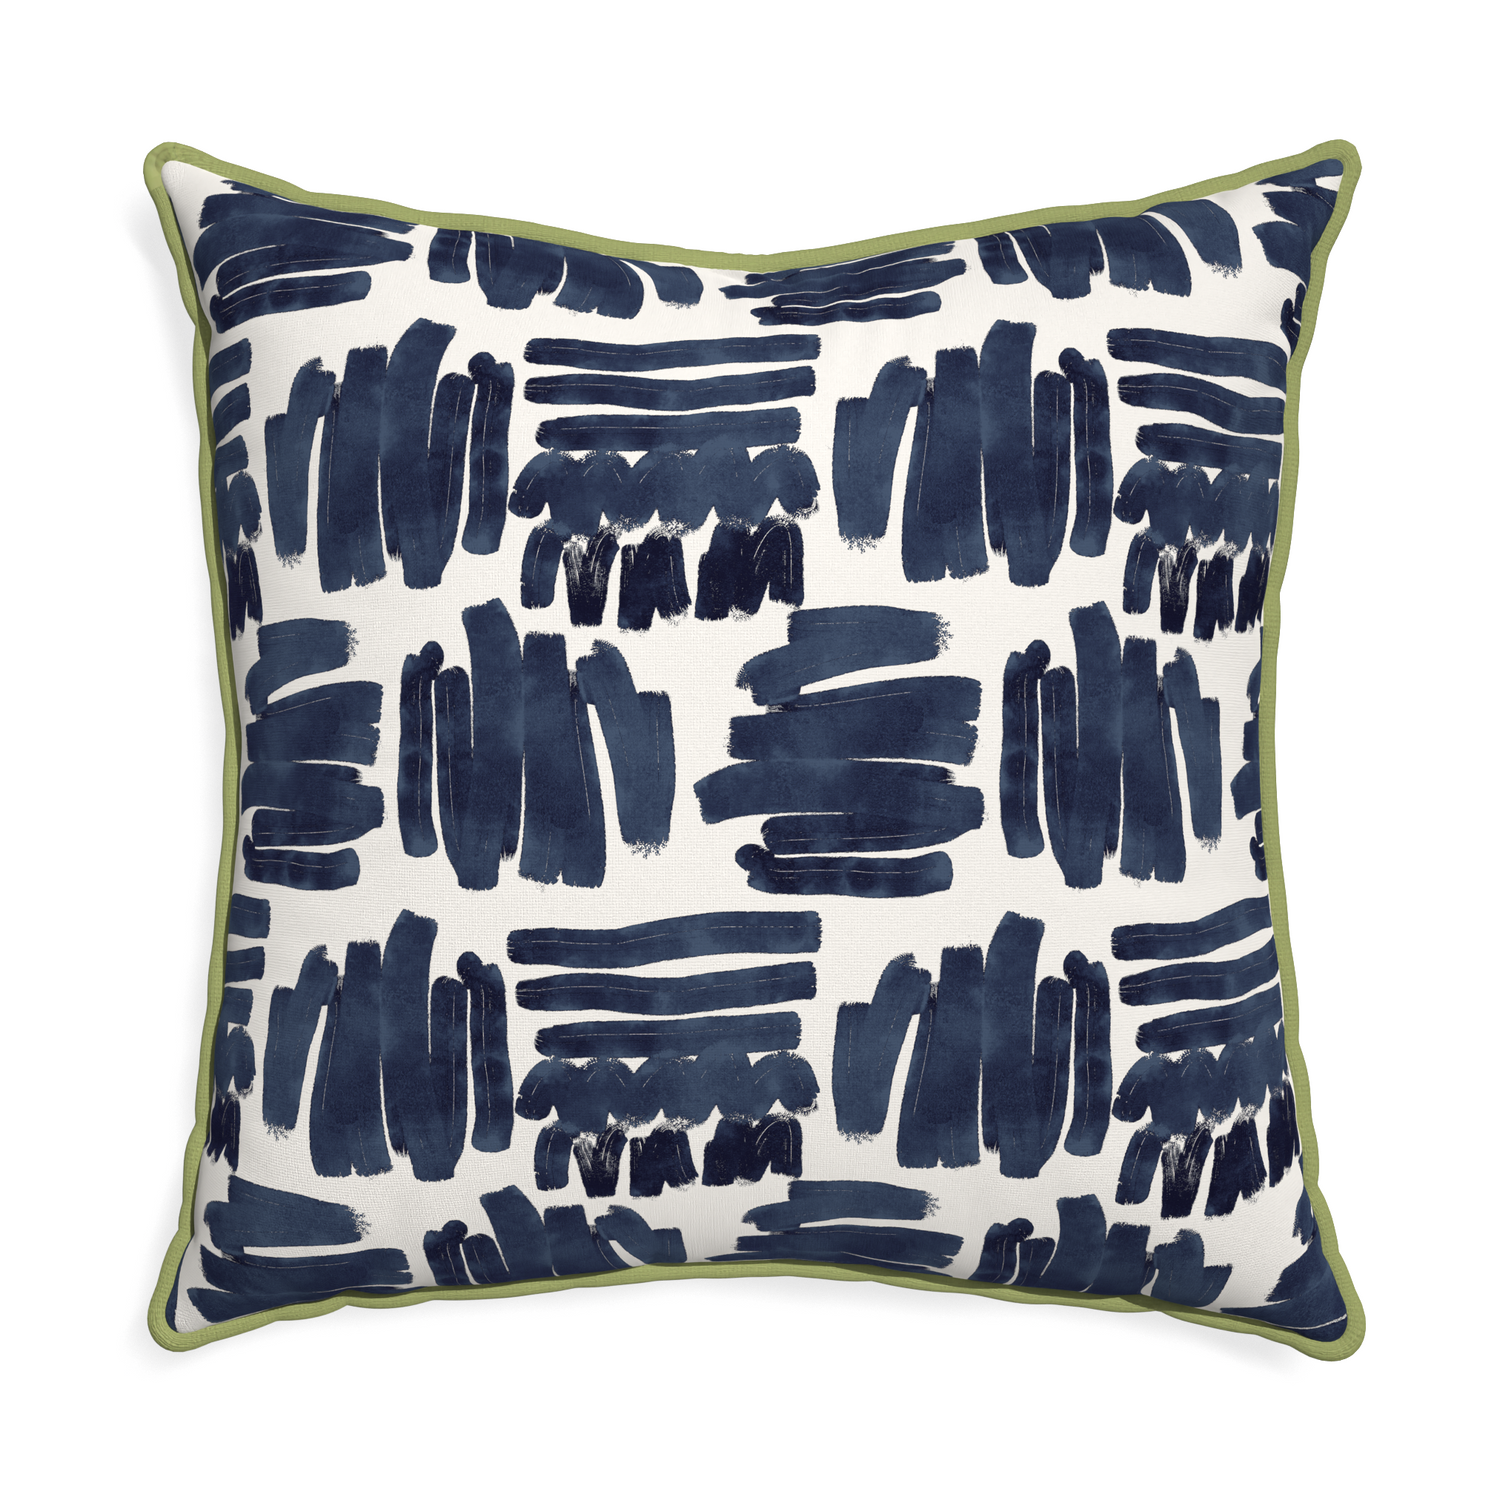 Euro-sham warby custom pillow with moss piping on white background